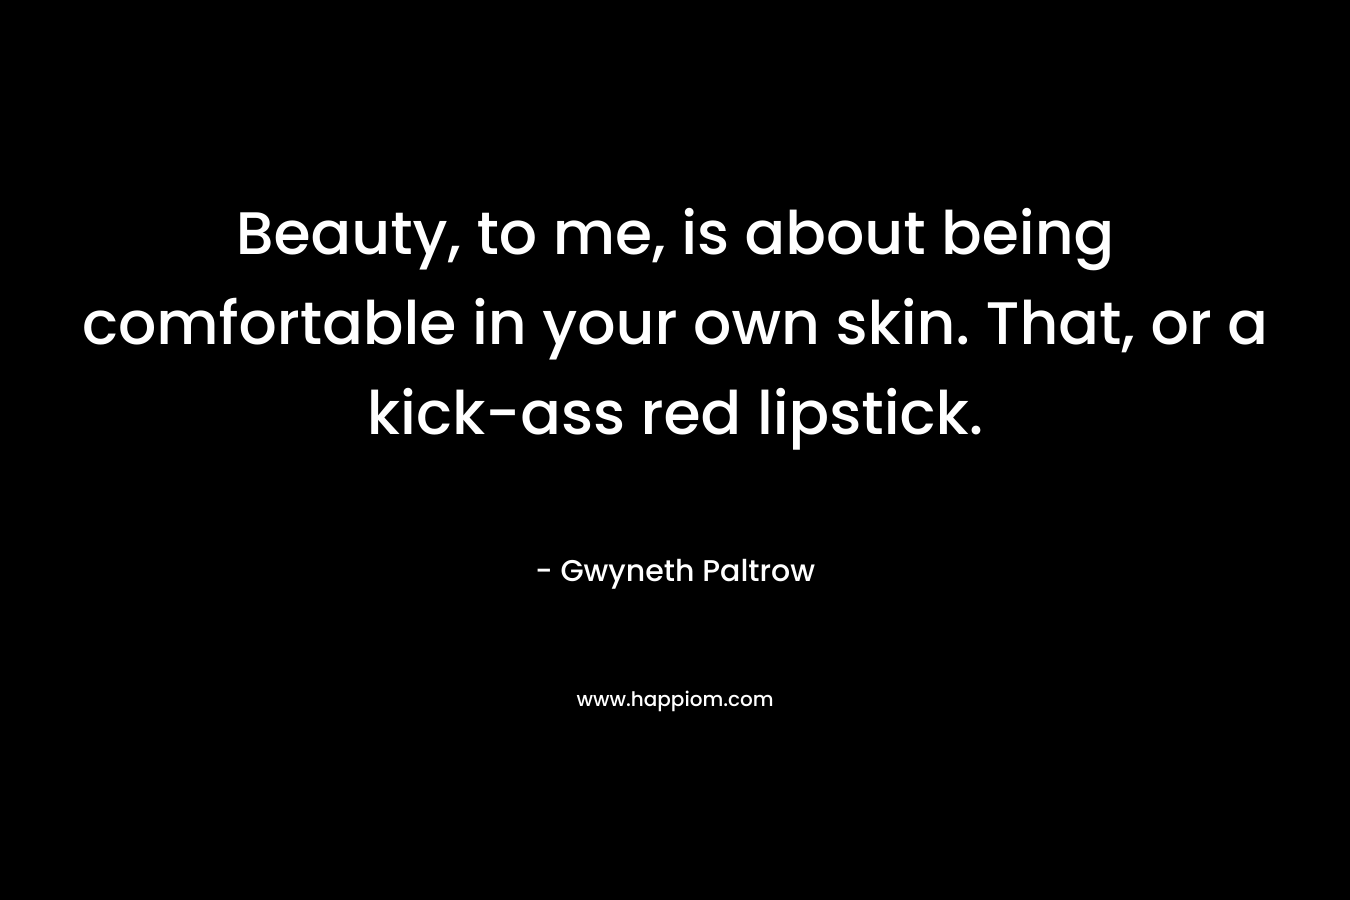 Beauty, to me, is about being comfortable in your own skin. That, or a kick-ass red lipstick.